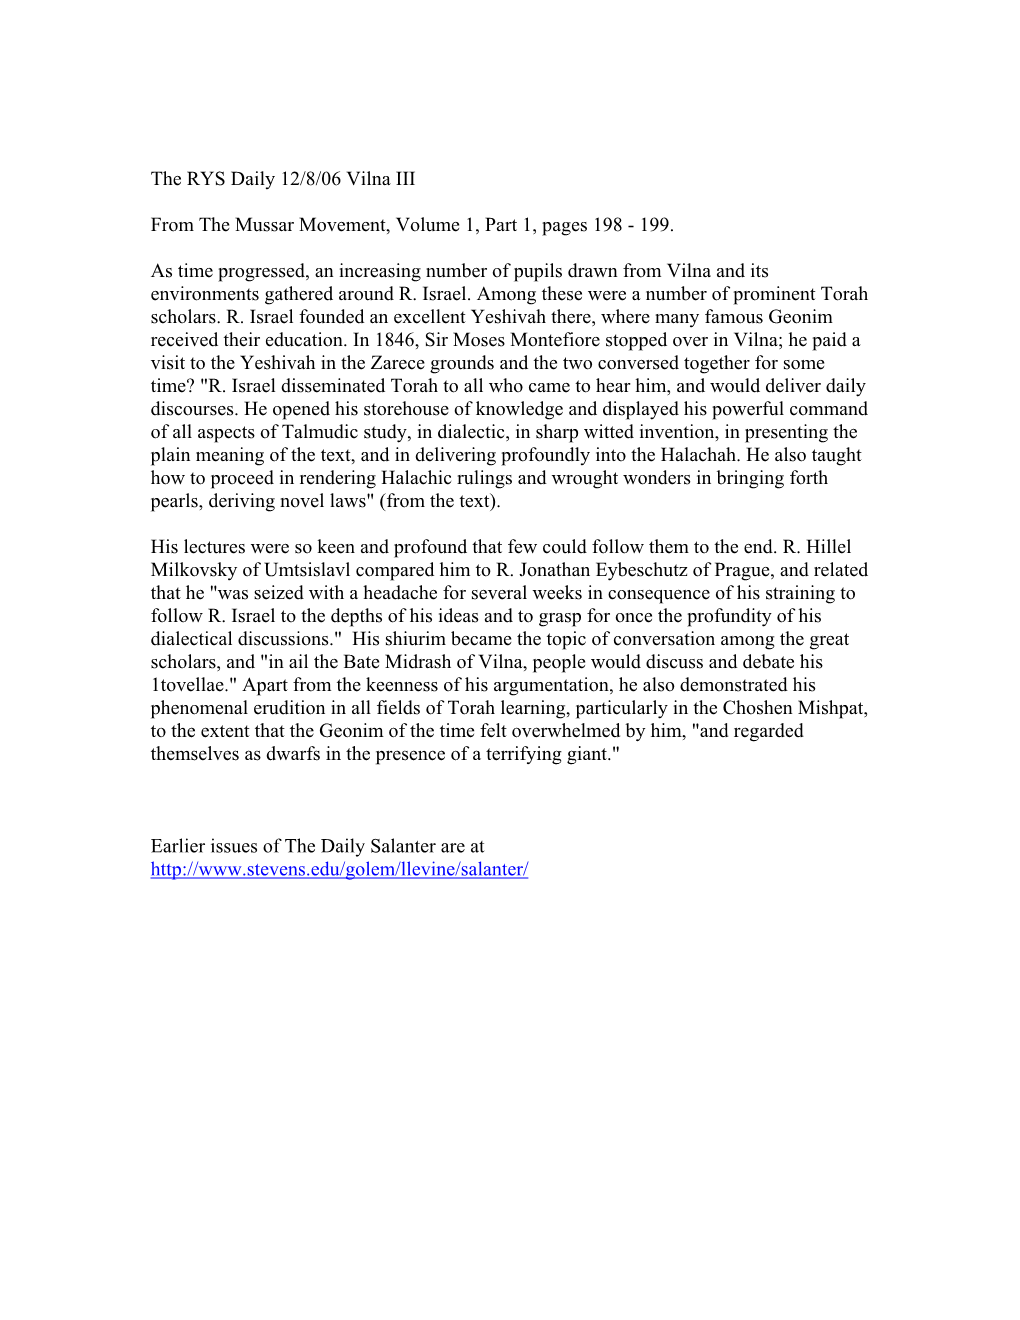 The RYS Daily 12/8/06 Vilna III from the Mussar Movement, Volume 1